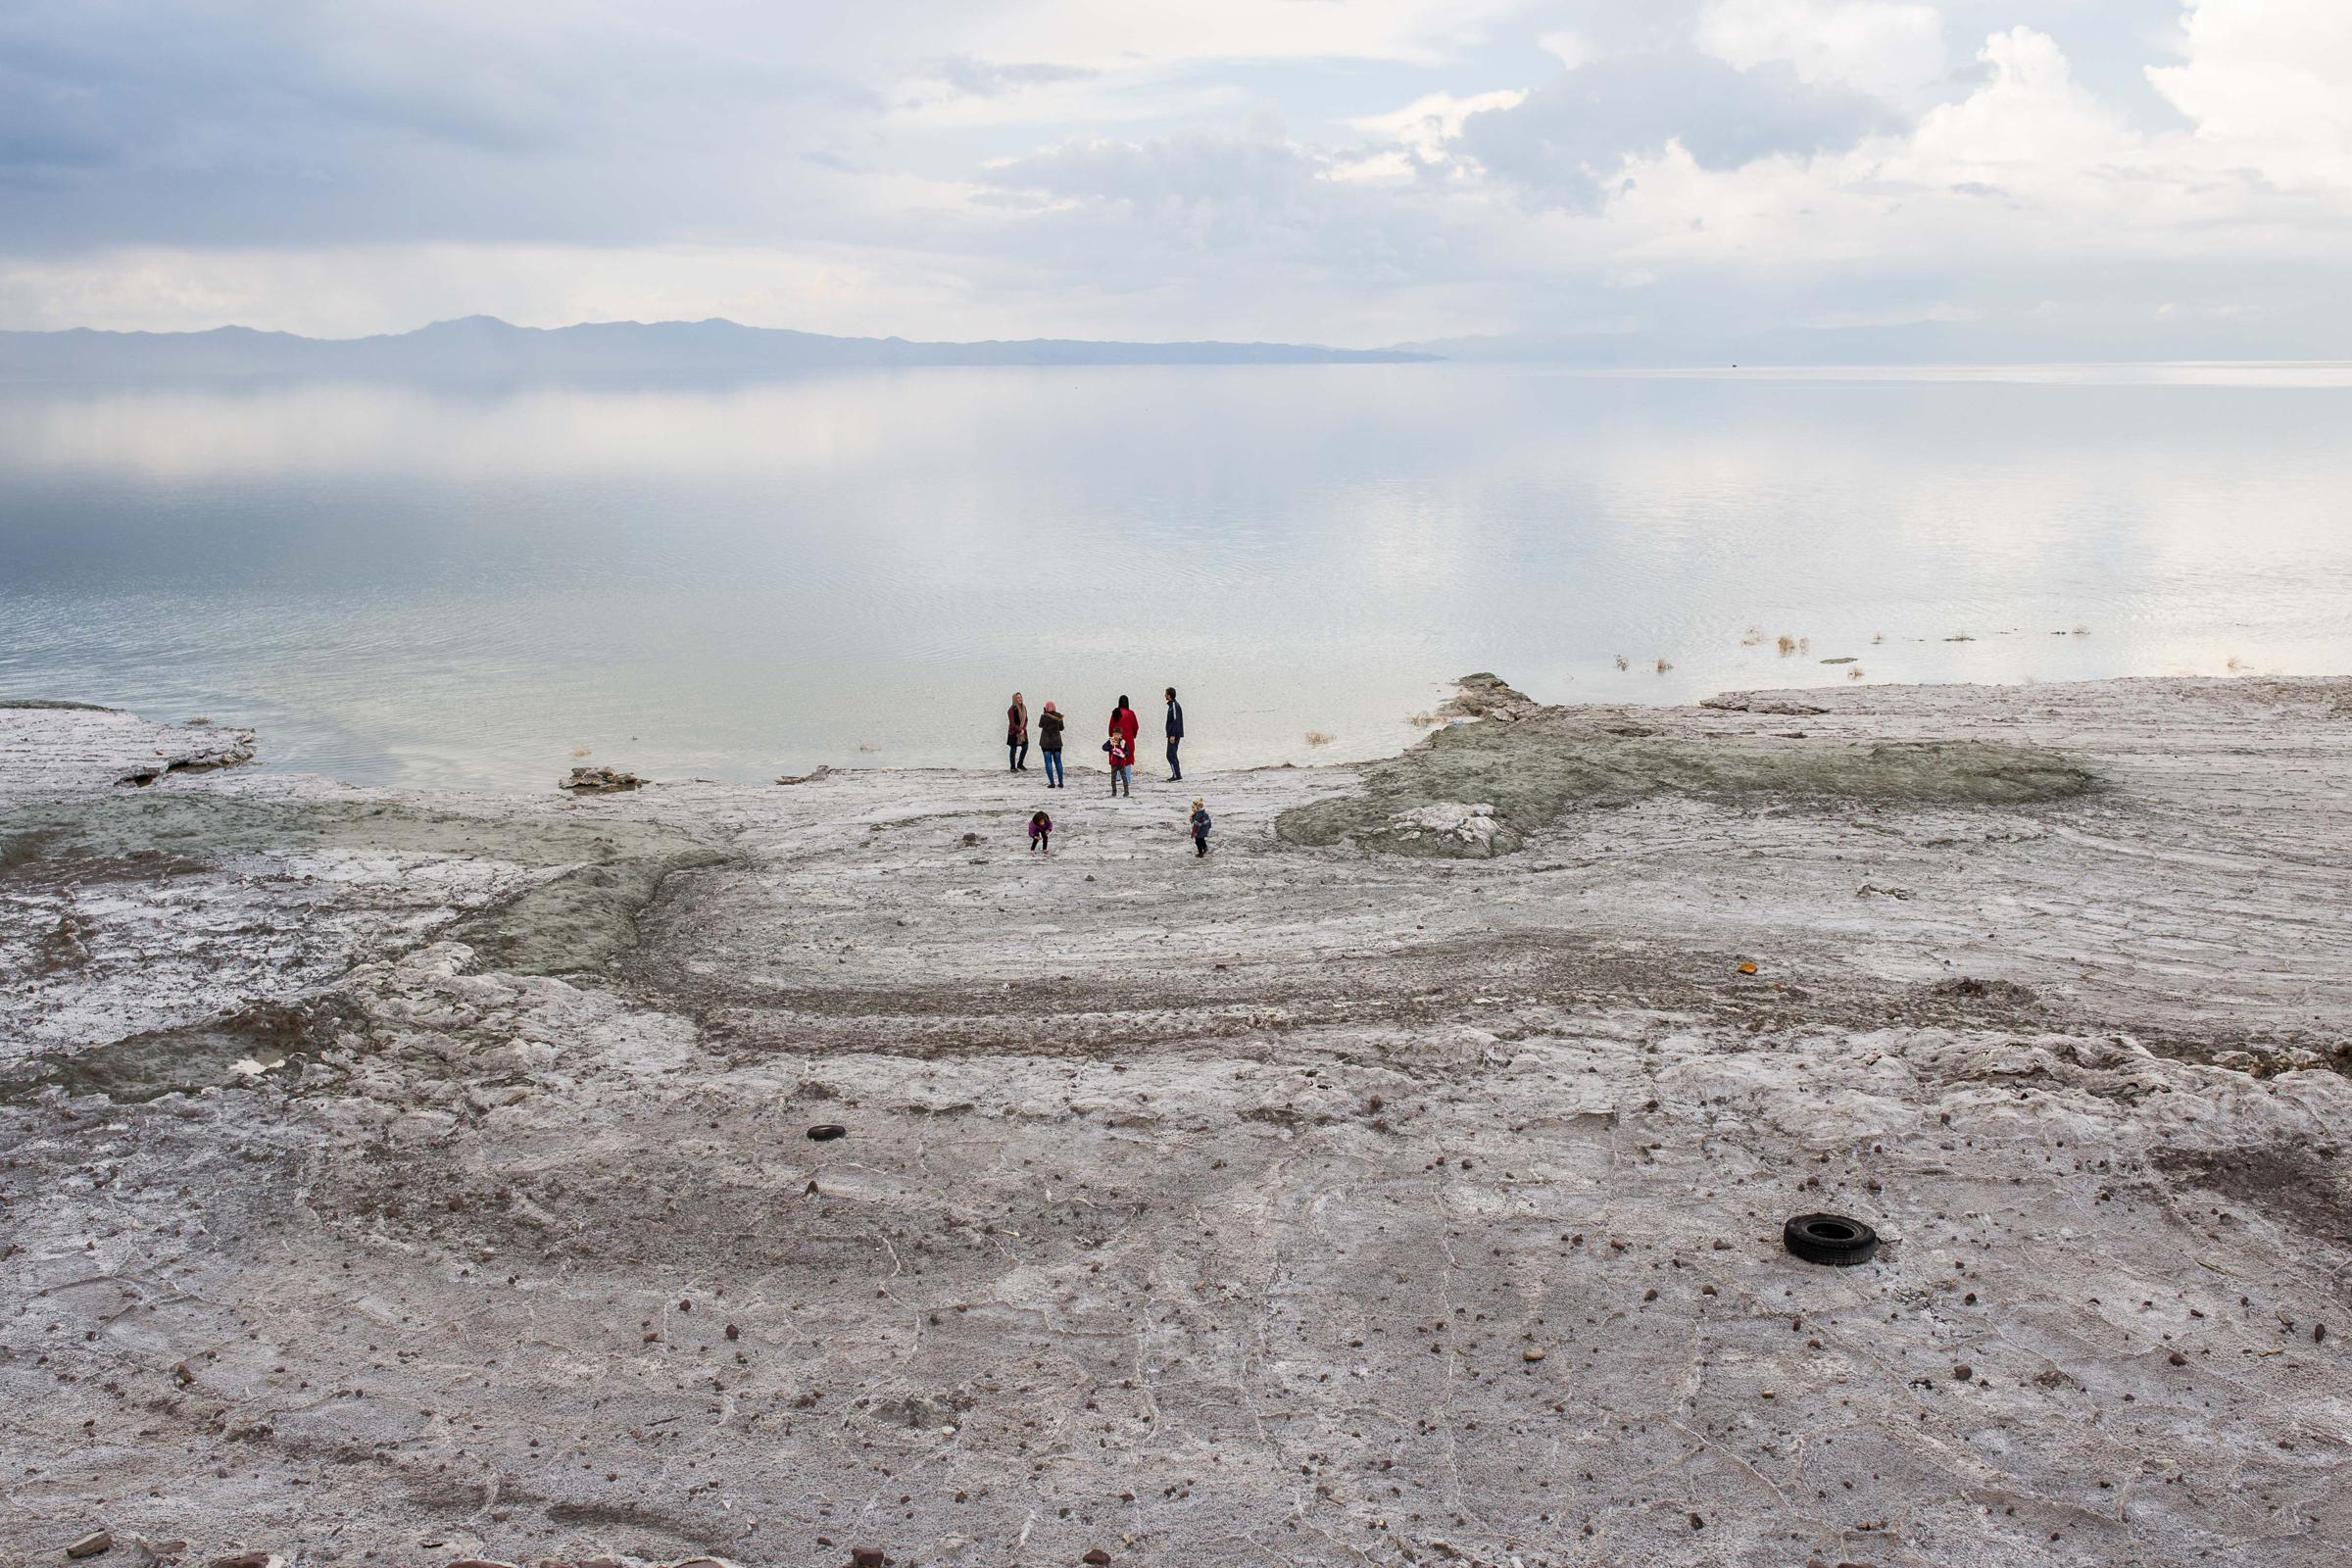  People came to visit lake Urmia and to take pictures of what remains of it. Lake Urmia is showing signs of recovery in some small parts because of...